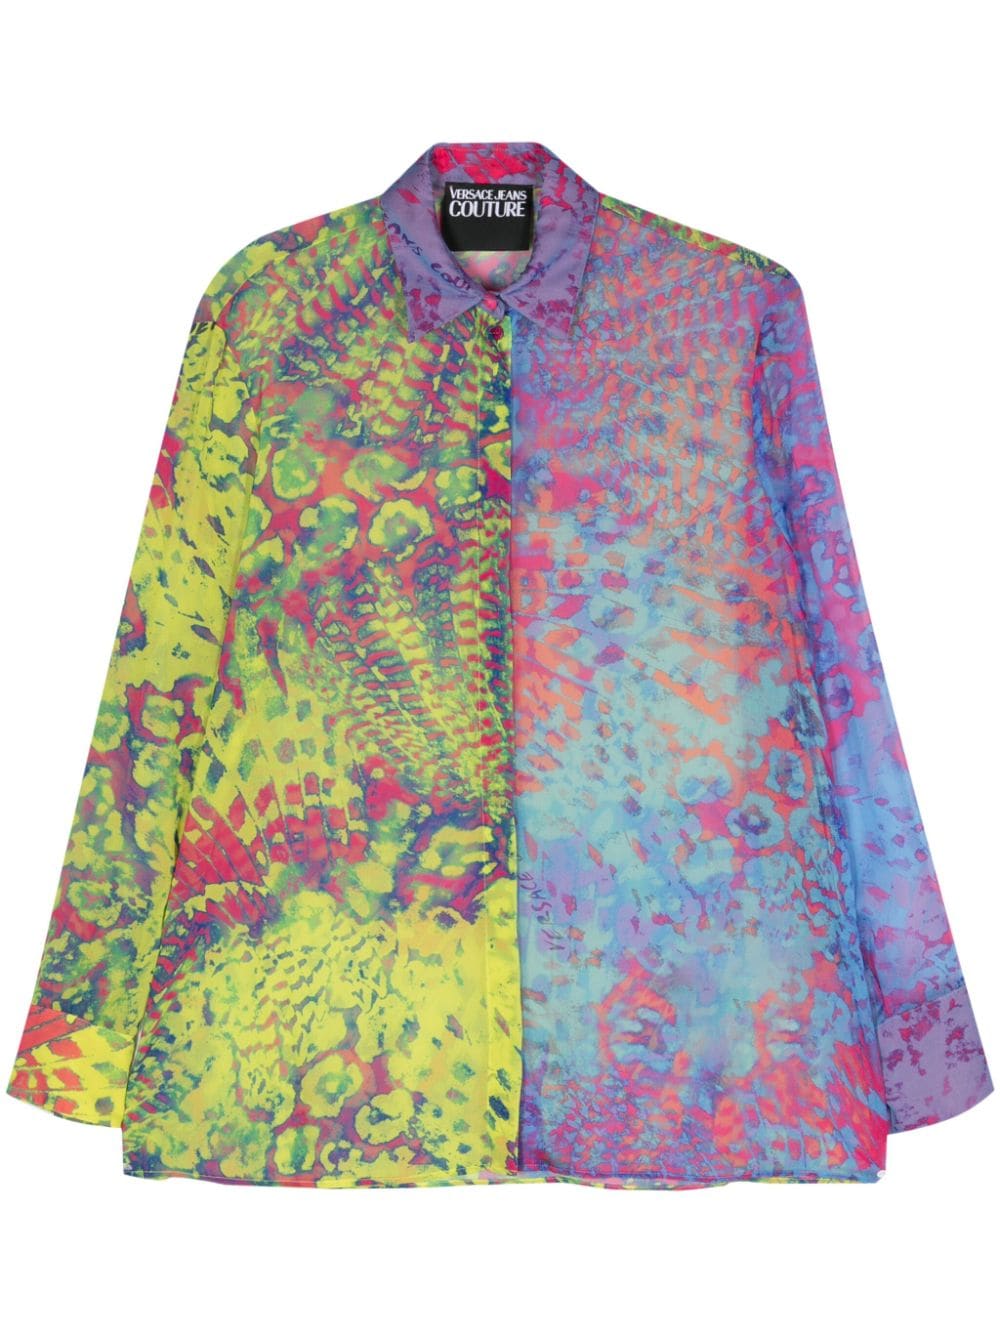 Versace Jeans Couture abstract-print sheer shirt - Blu